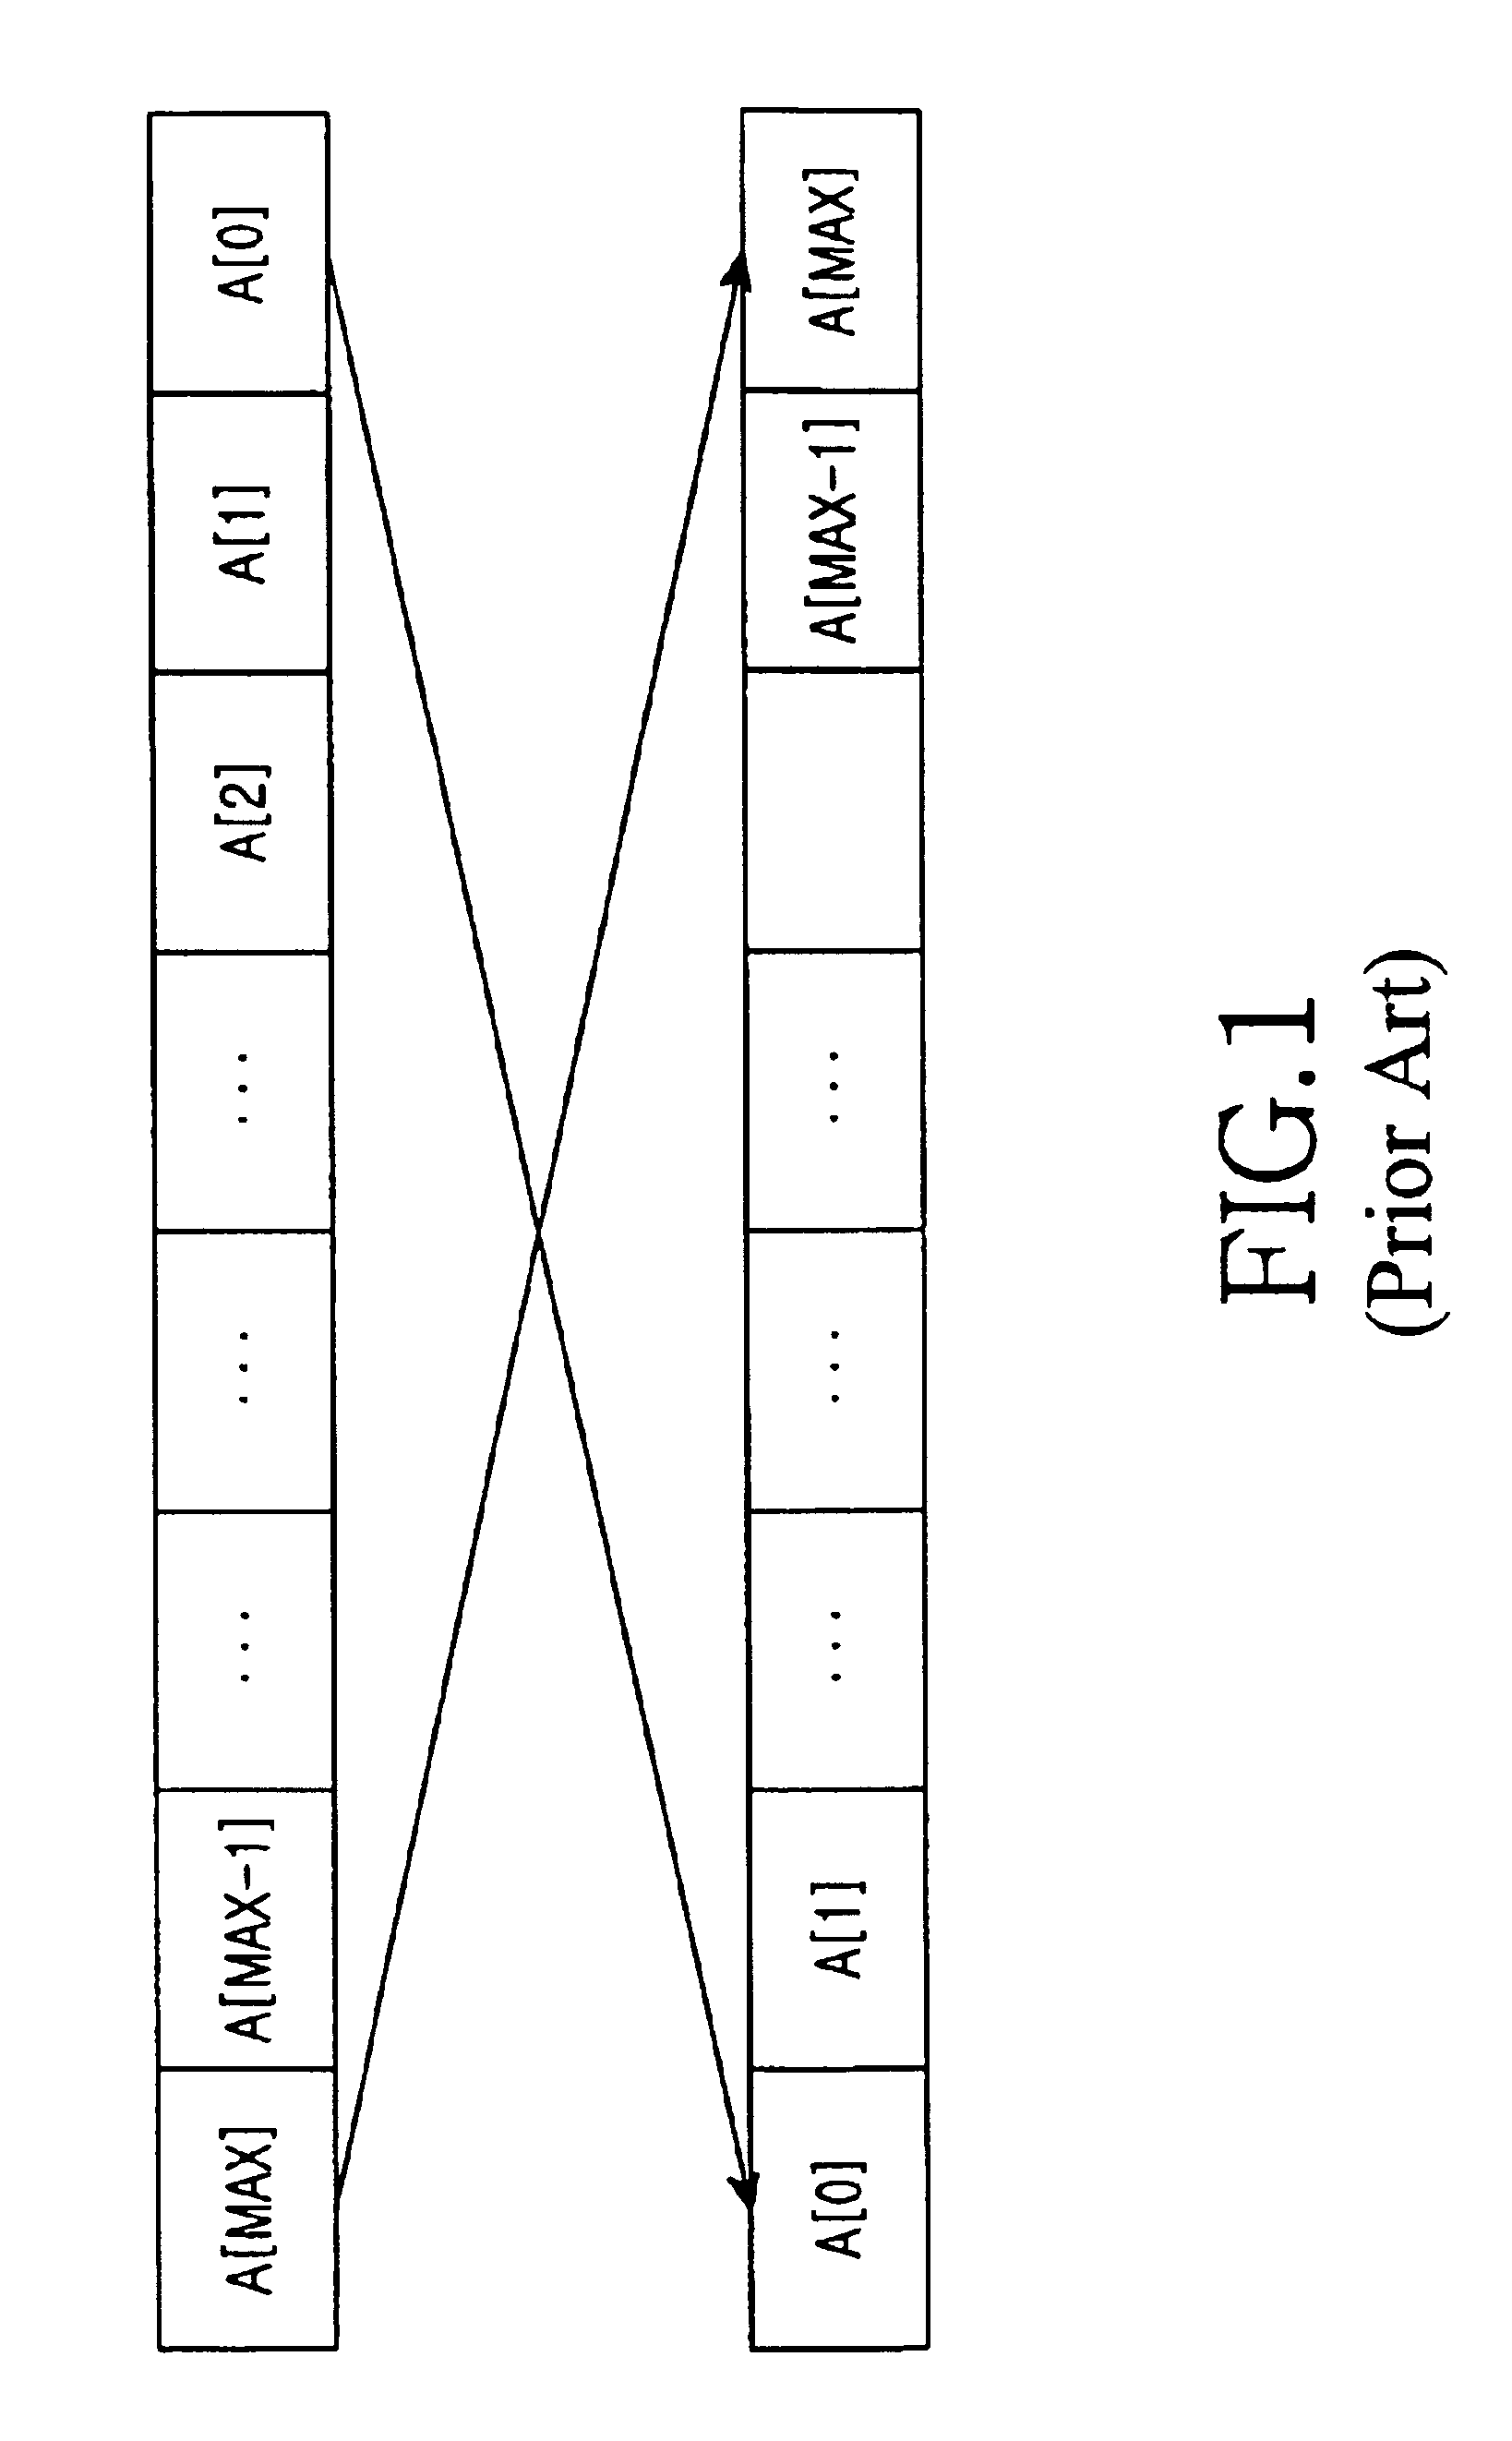 Interleaving apparatus and method for a communication system